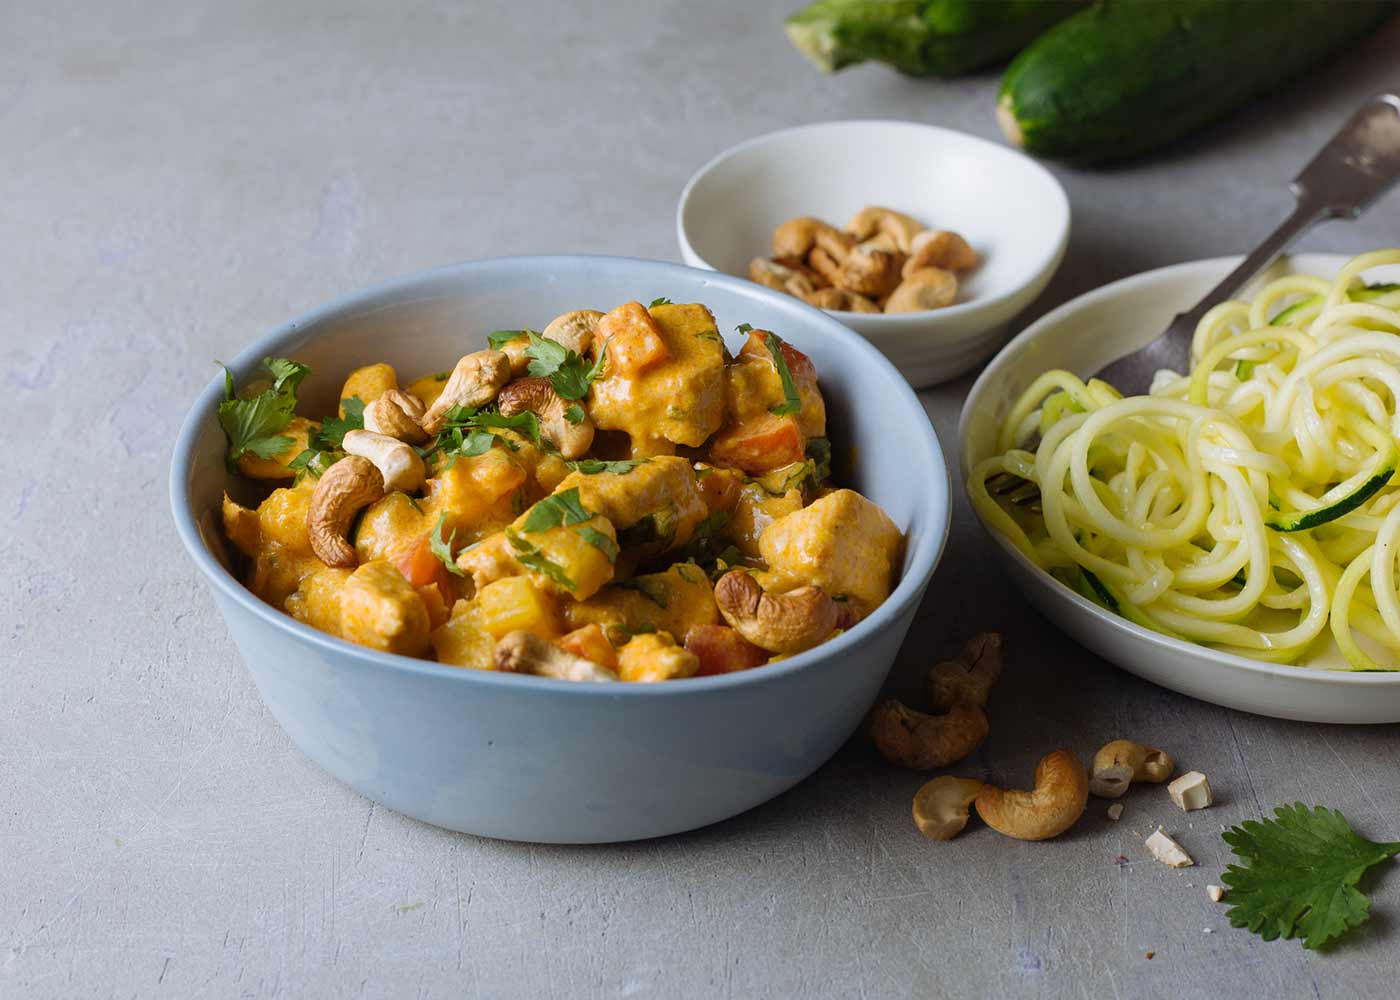 Red Thai chicken curry with courgetti cashew nuts recipe